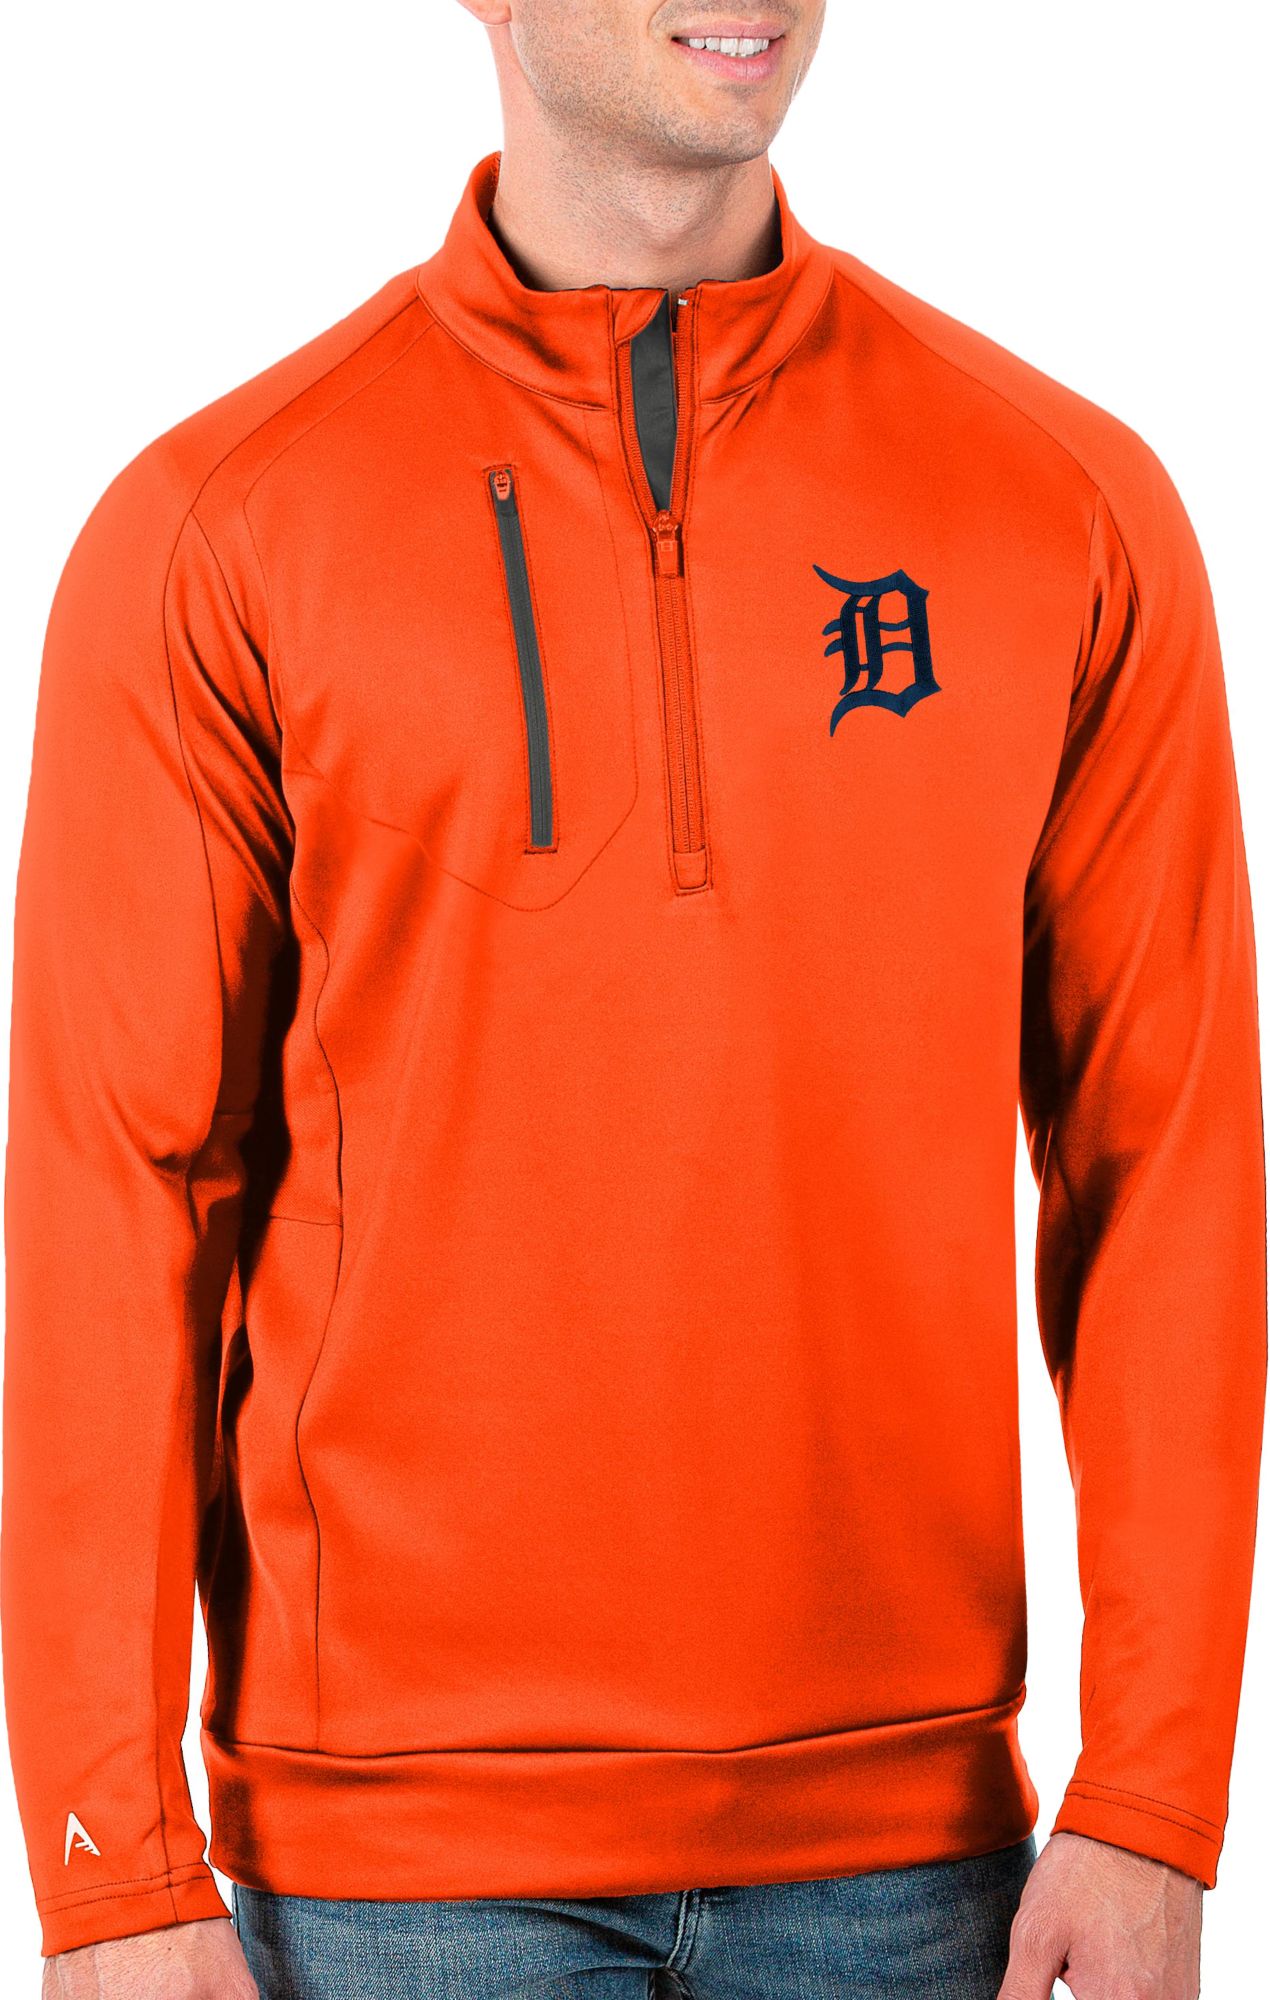 Detroit Tigers Apparel & Gear  Curbside Pickup Available at DICK'S